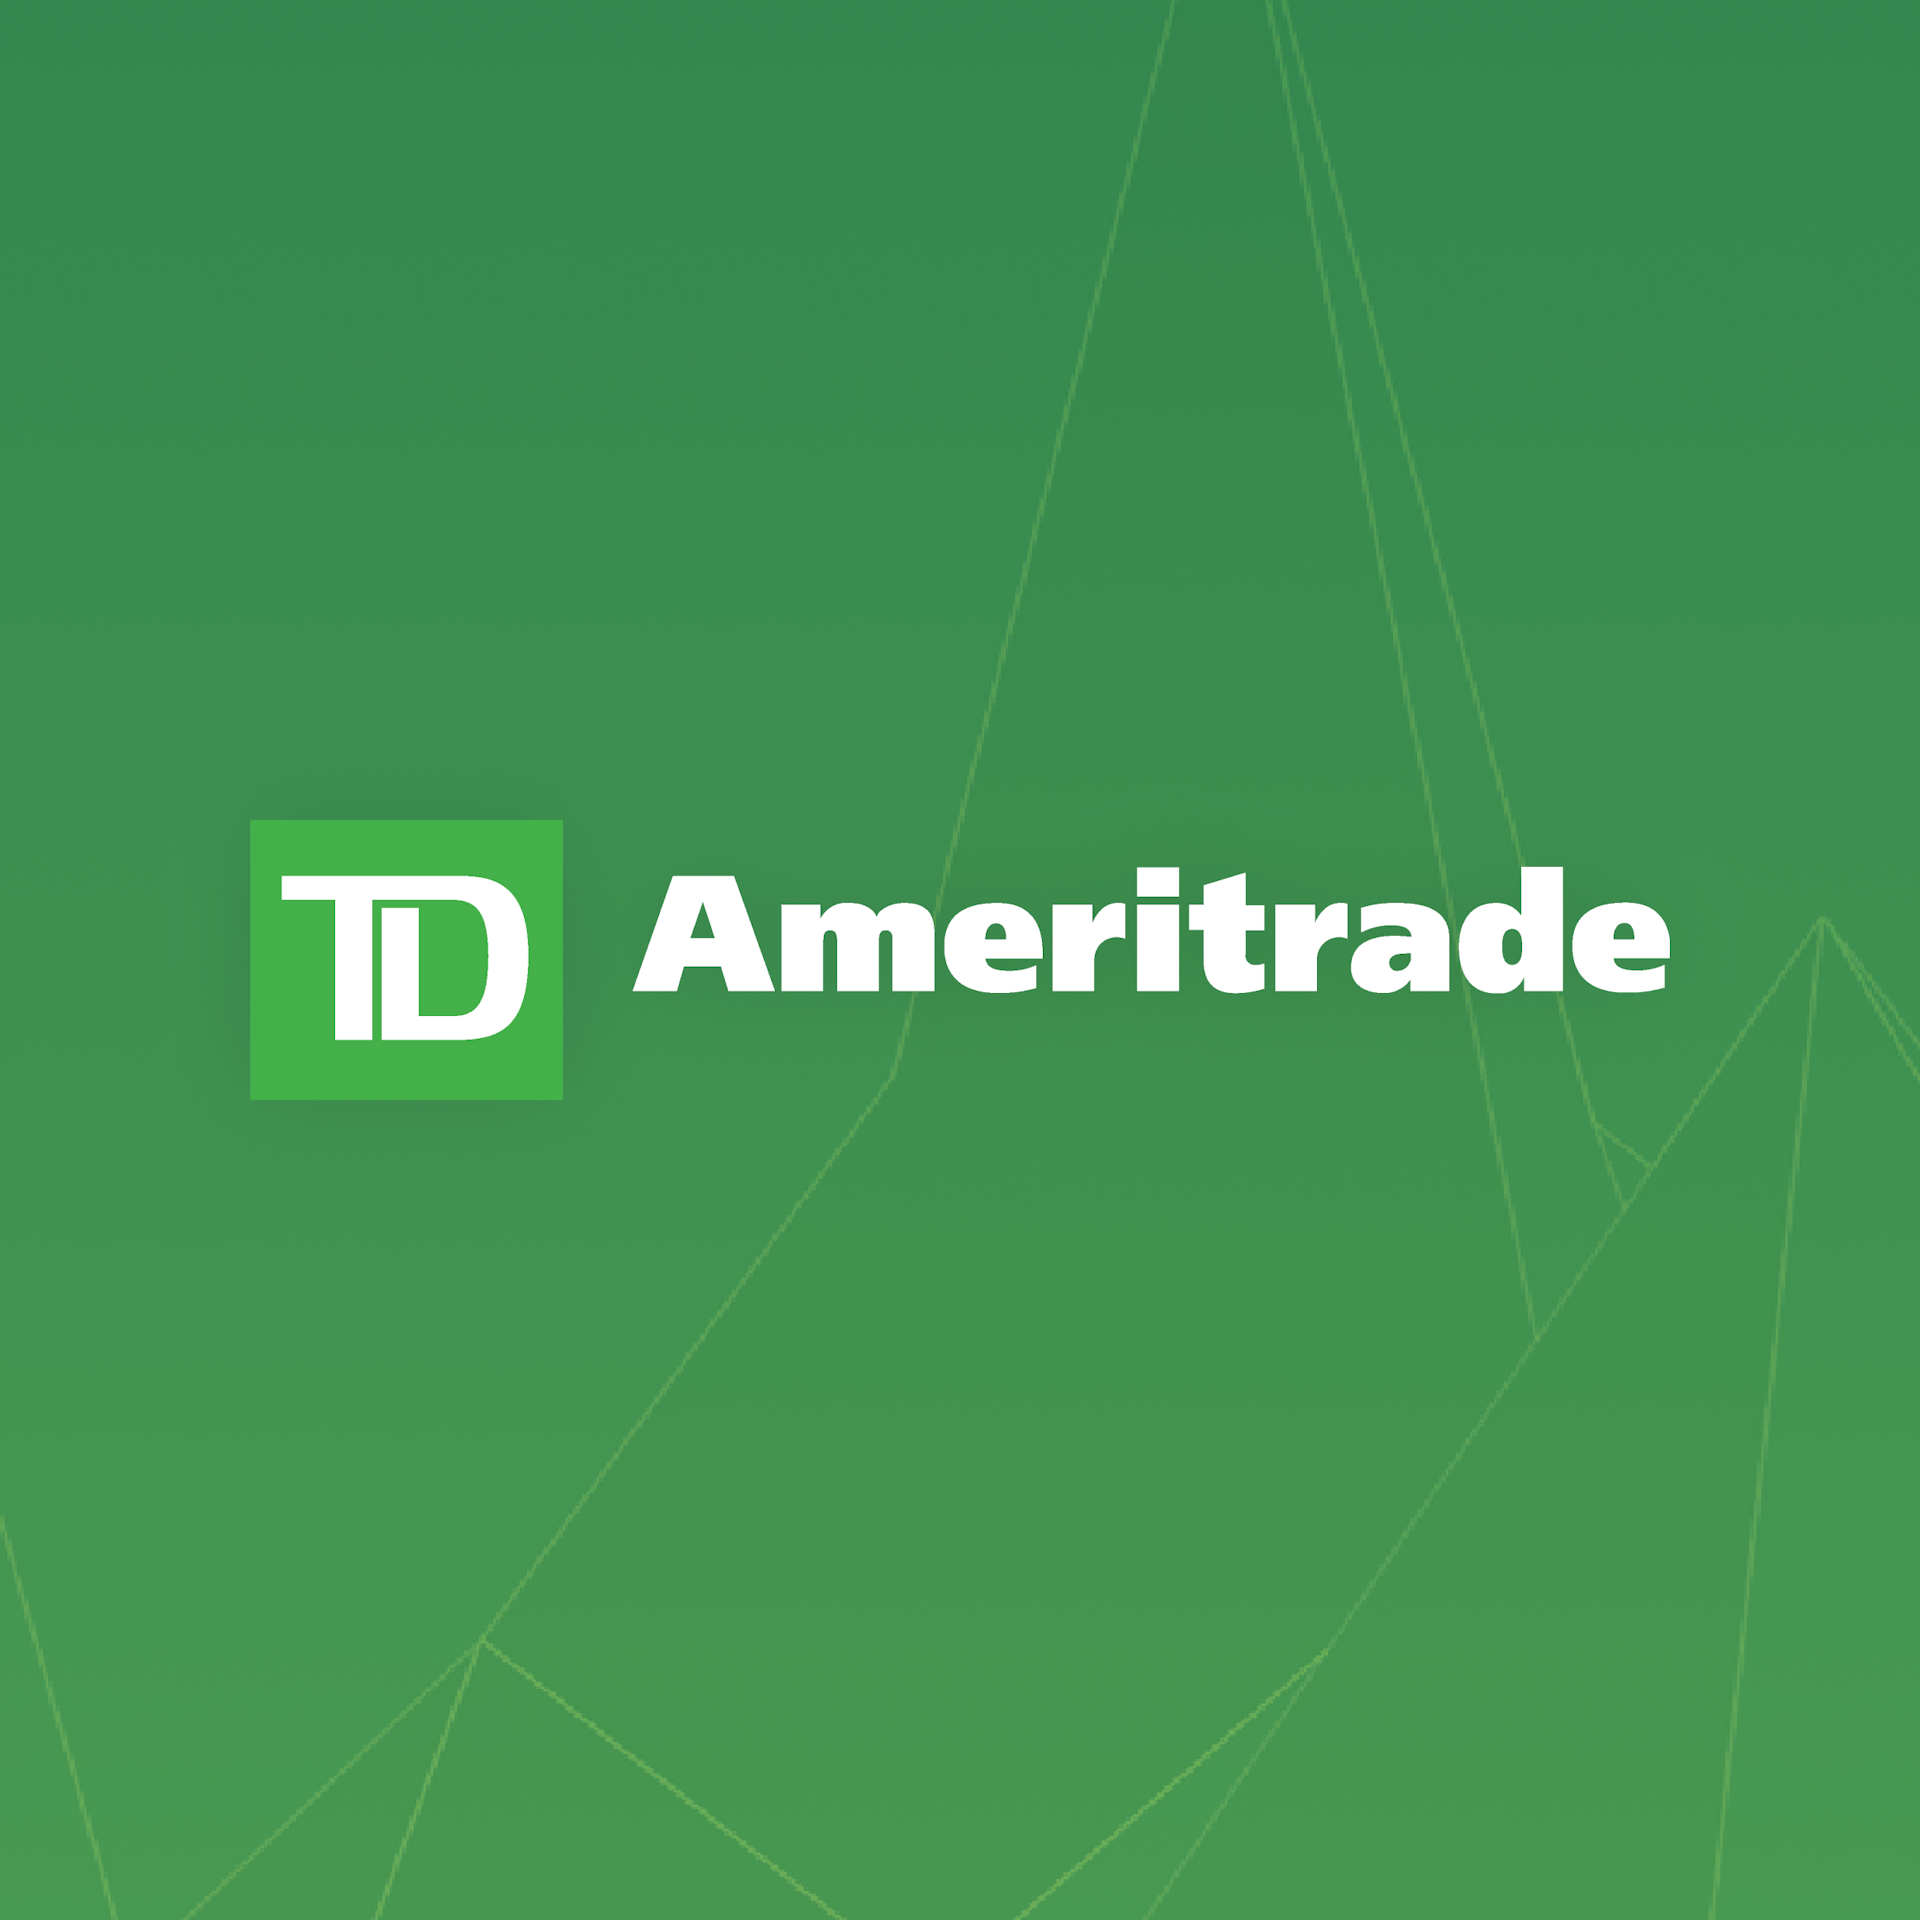 Designs we did for TD Ameritrade